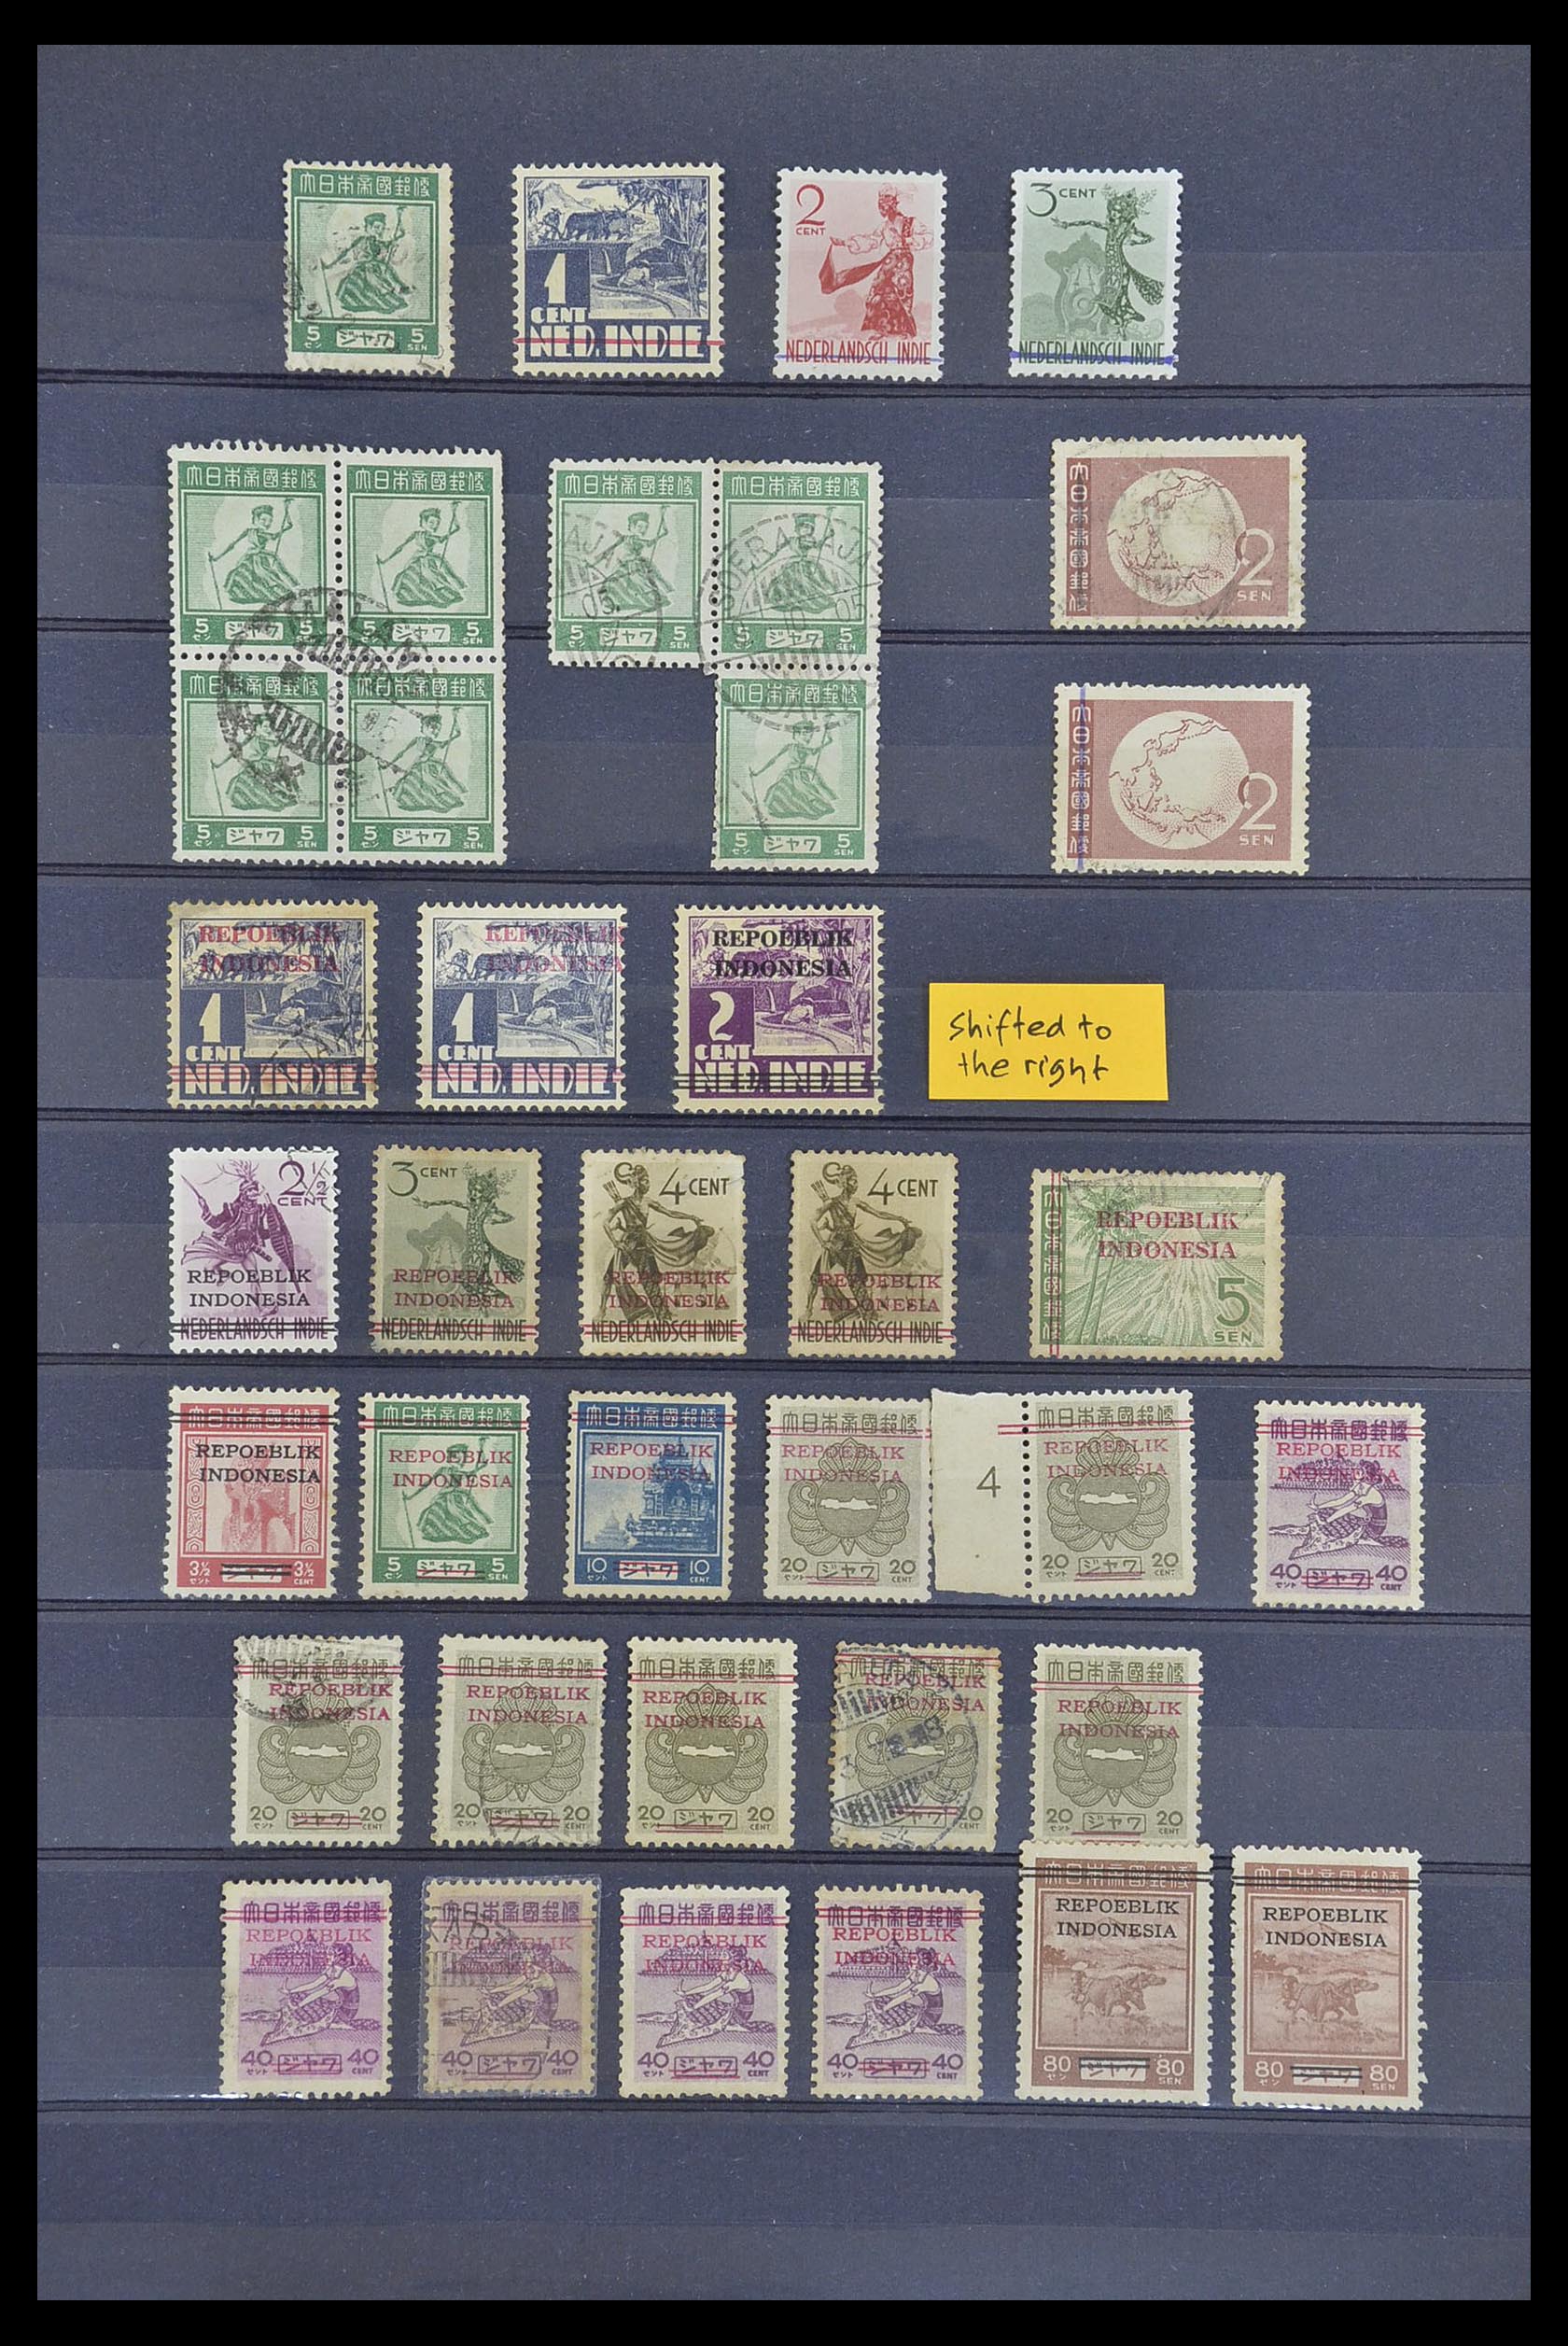 33722 001 - Stamp collection 33722 Japanese occupation Dutch east Indies and interim